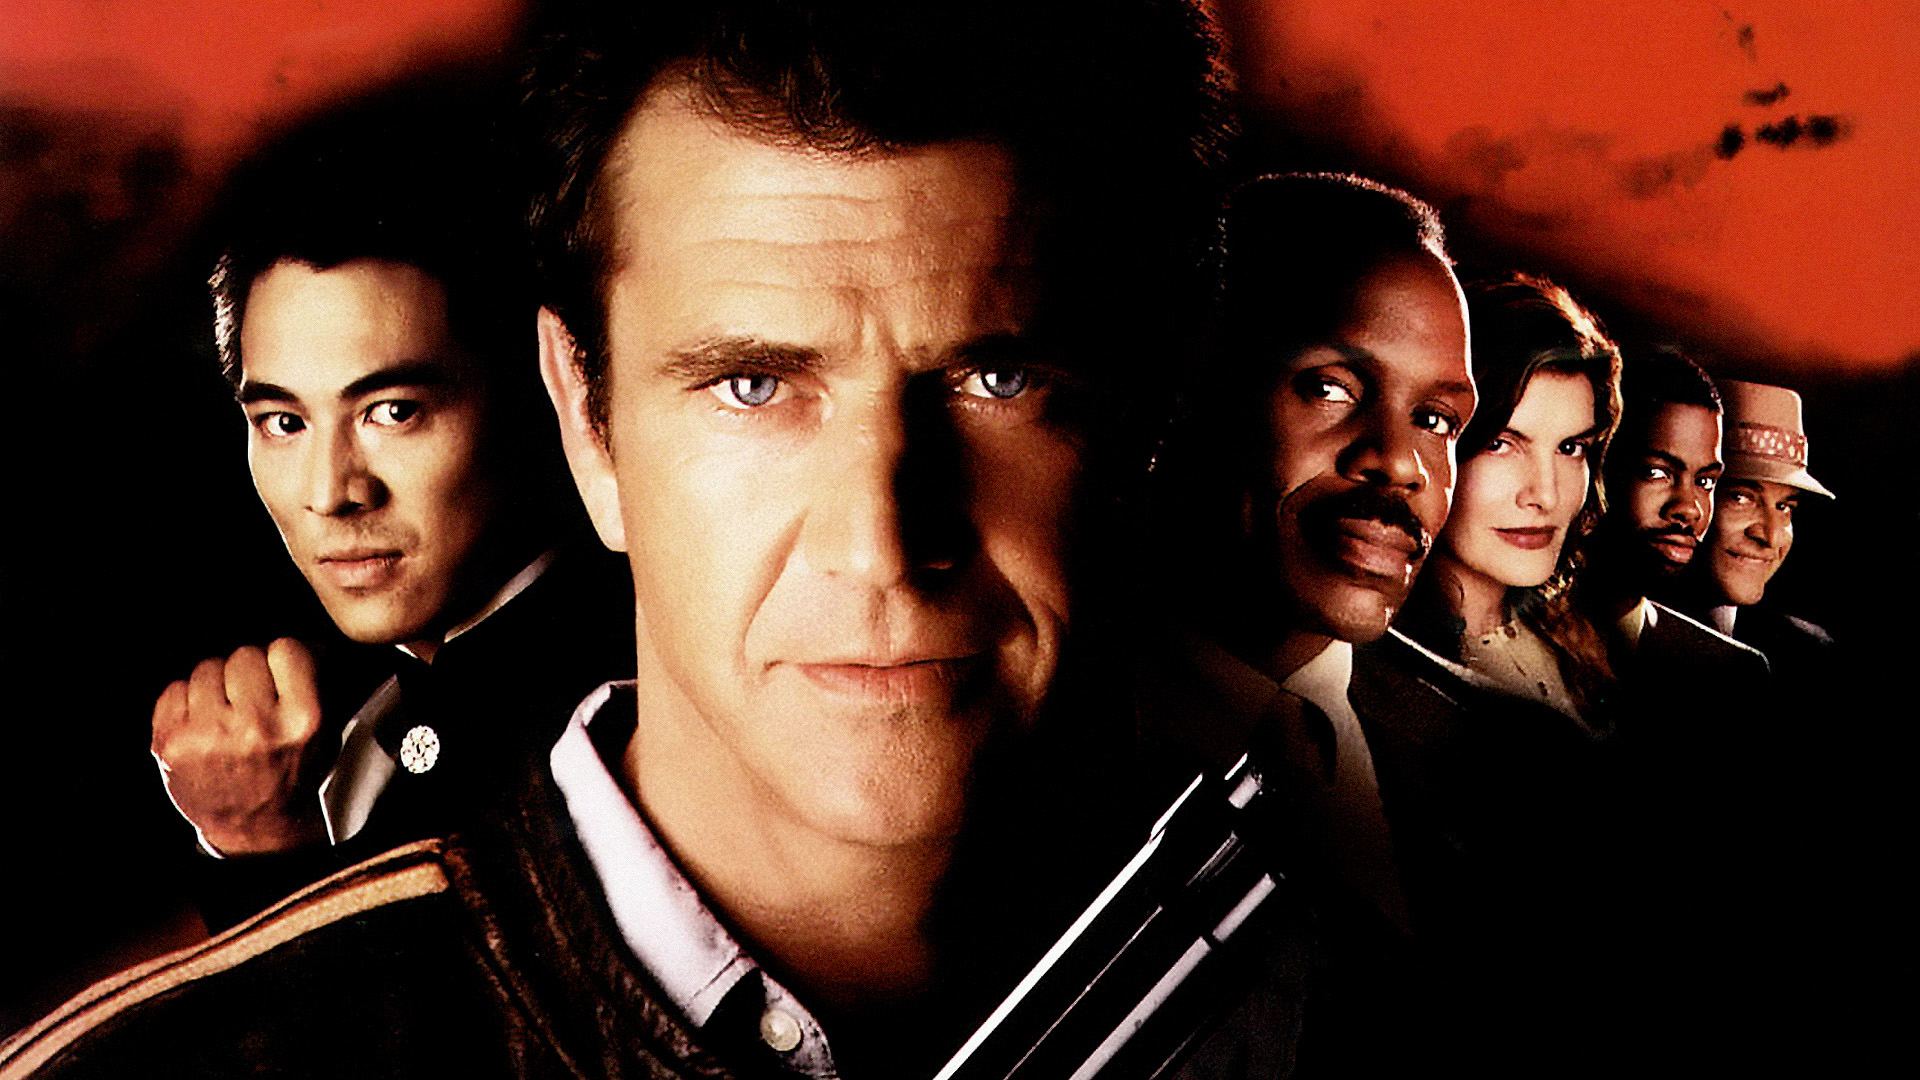 lethal weapon wallpaper,movie,action film,poster,fictional character